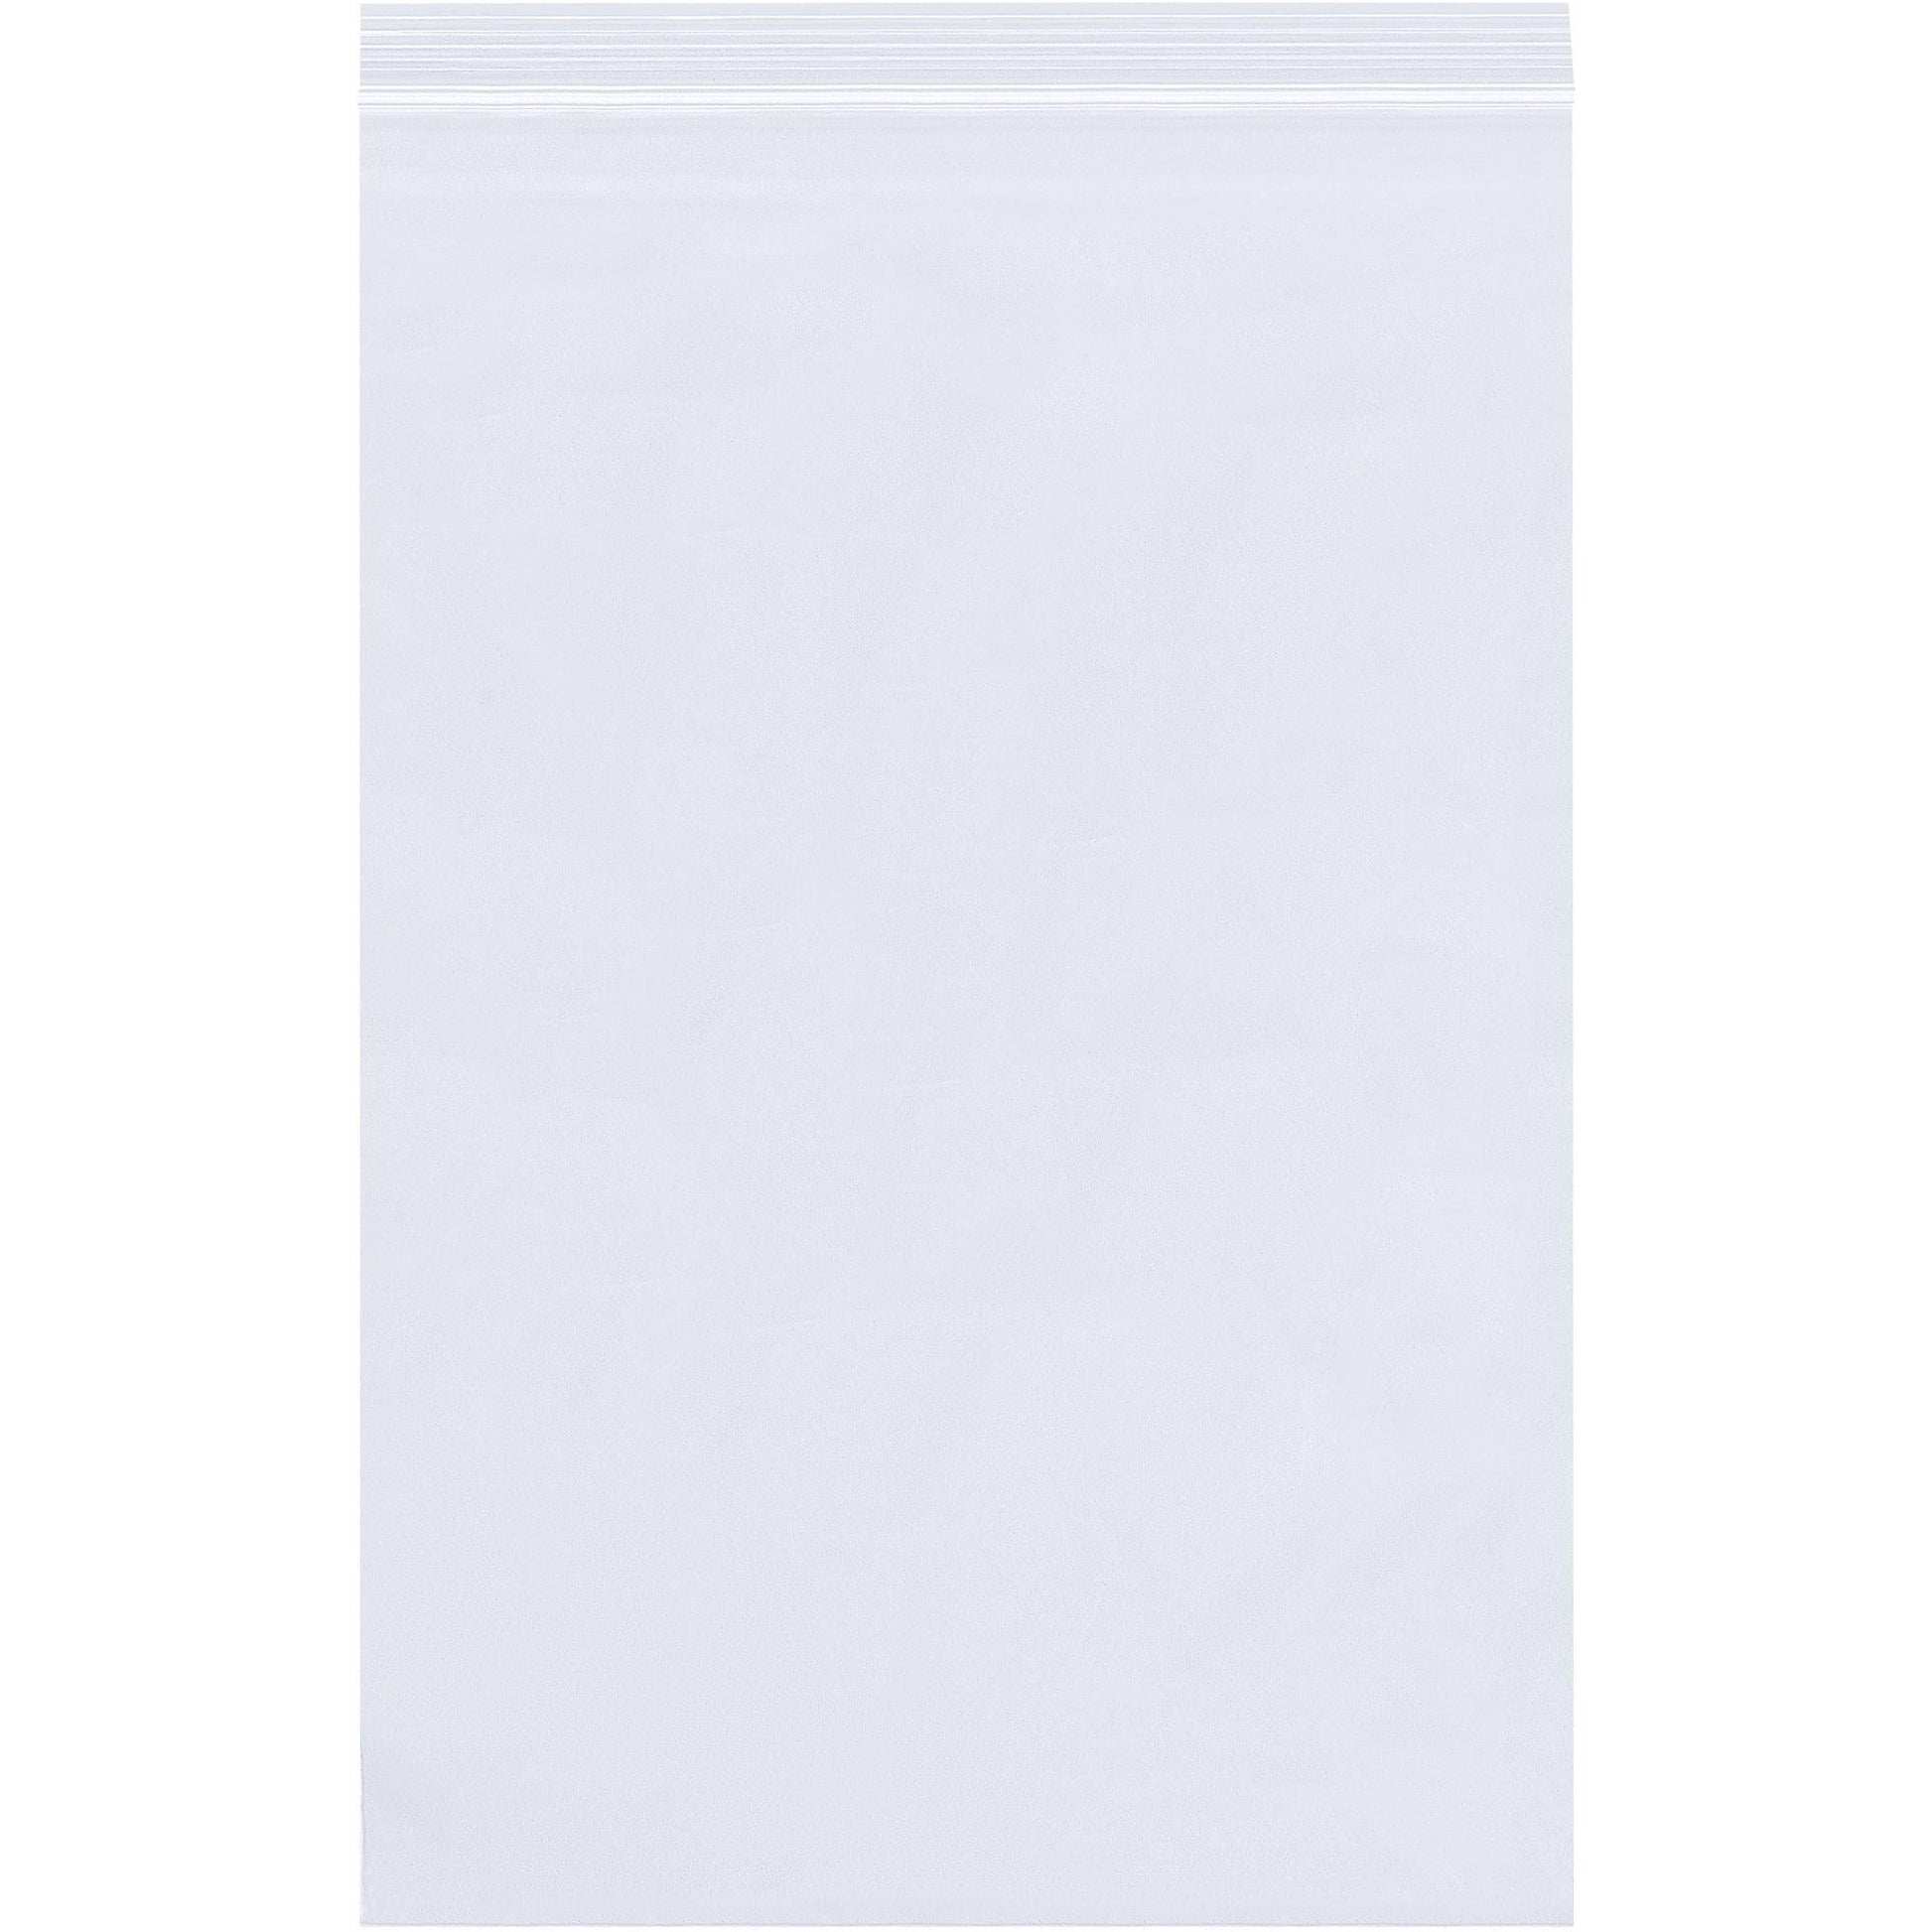 20 x 24" - 6 Mil Reclosable Poly Bags - PB3907